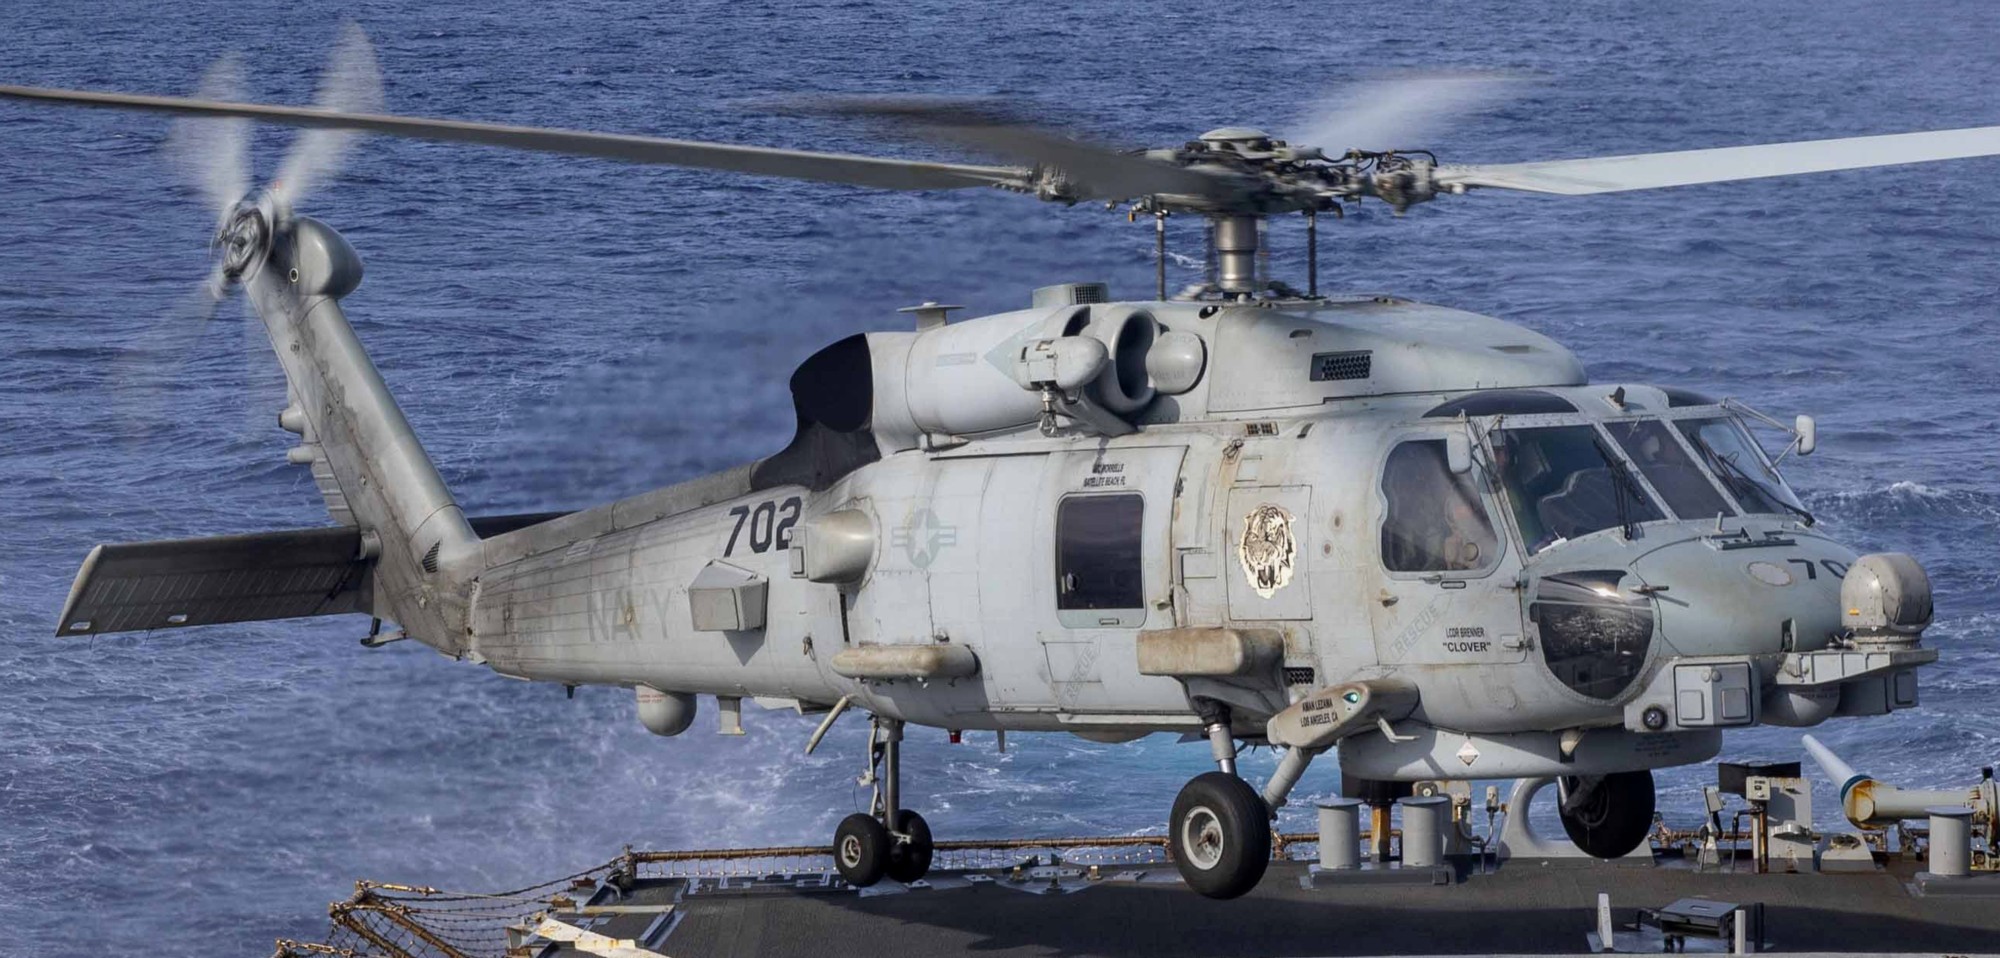 hsm-73 battlecats helicopter maritime strike squadron mh-60r seahawk ddg-73 uss decatur 104